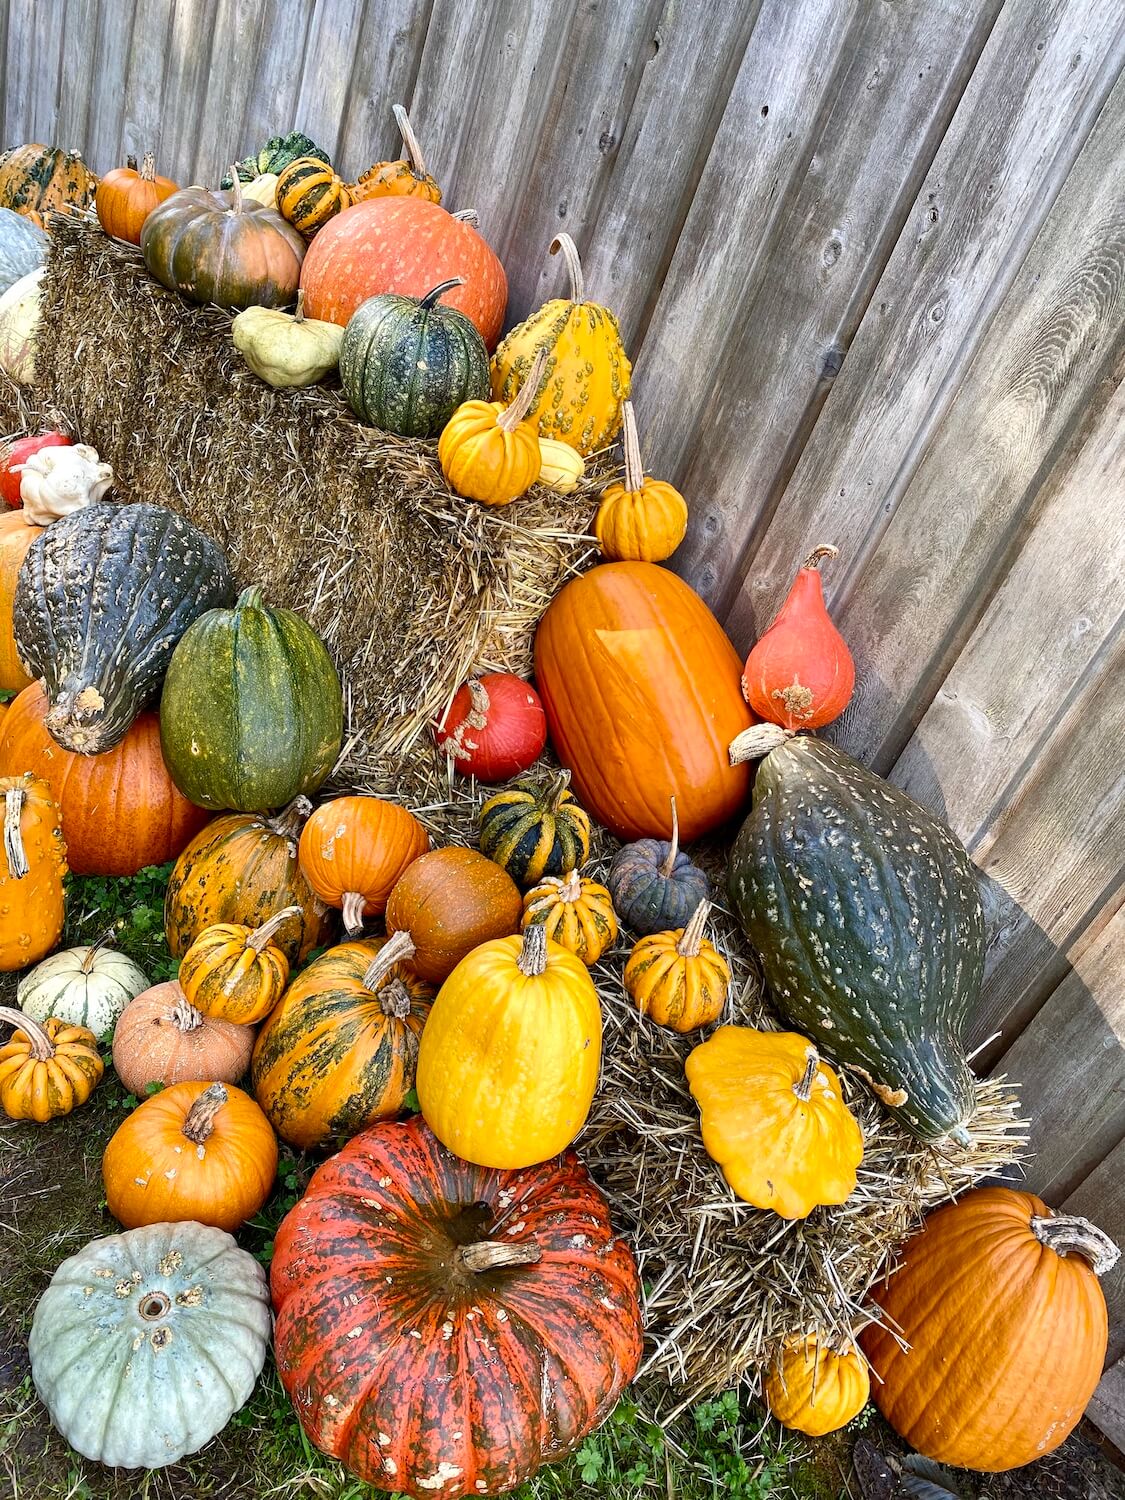 An array of harvest gourds are piled up on some straw bales against a gray wood barn.